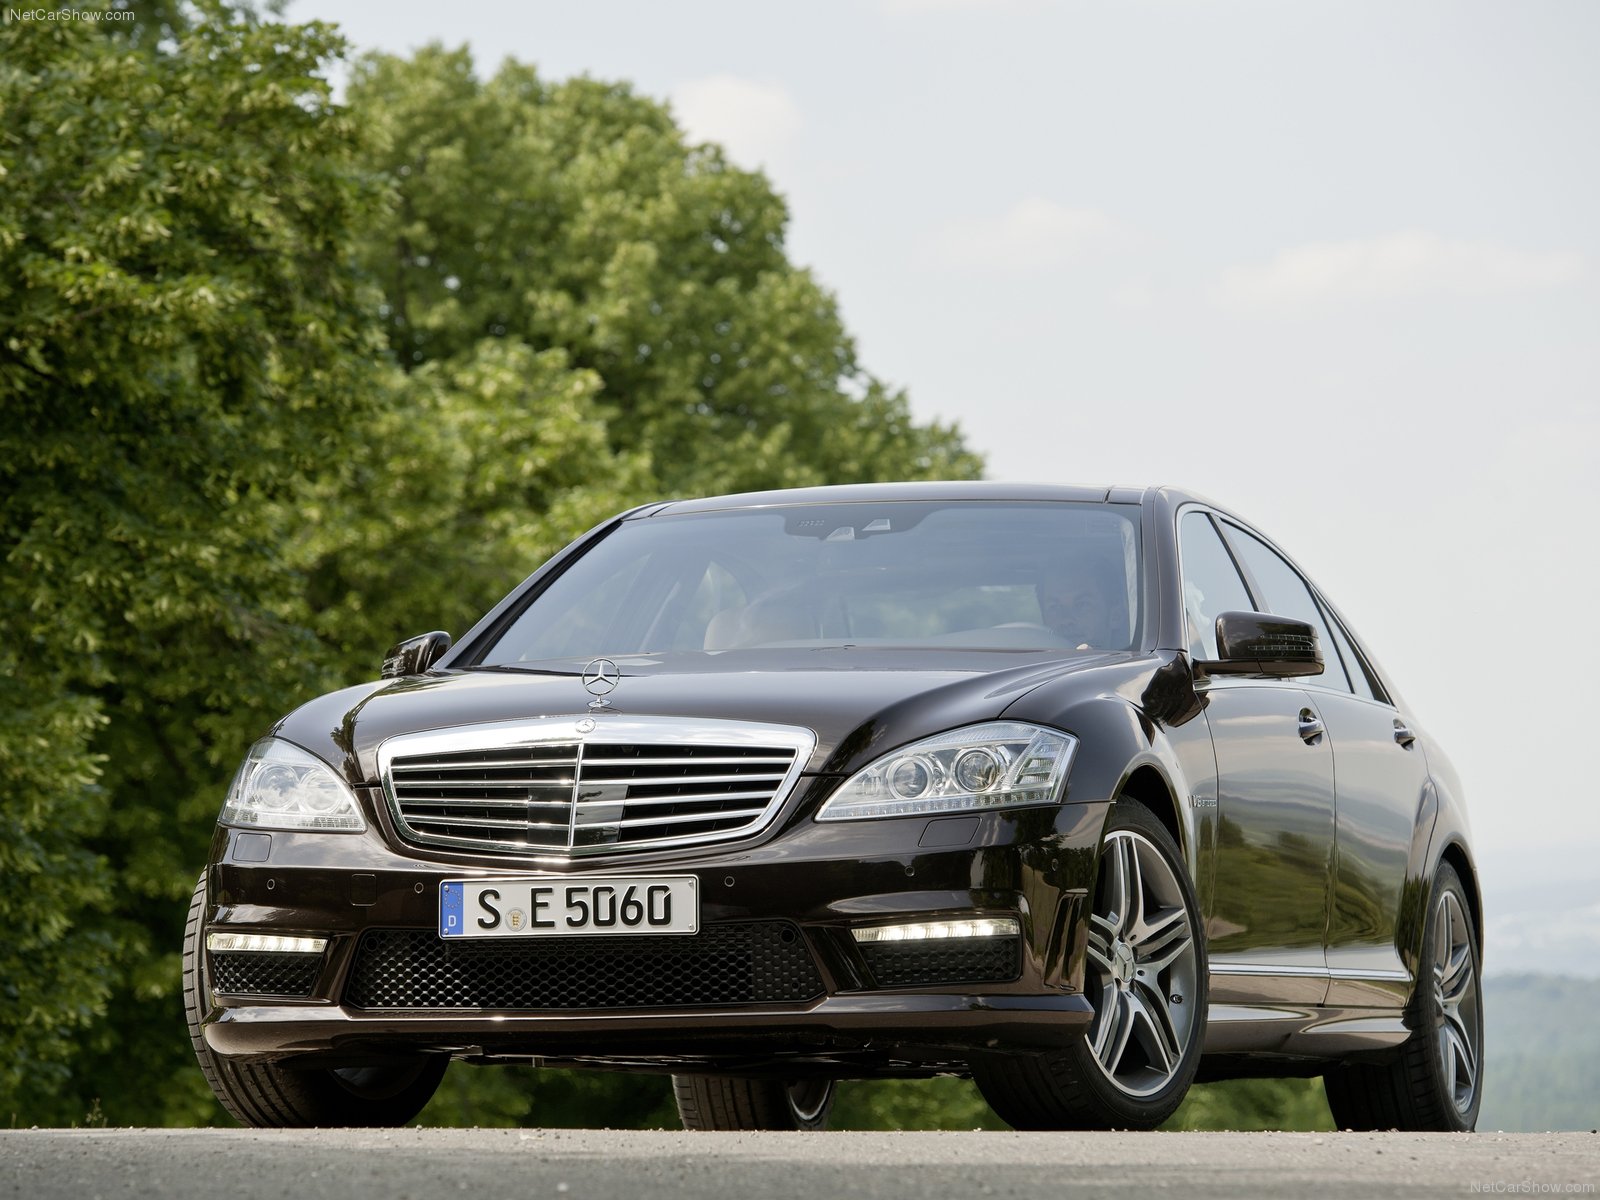 To provide high quality used parts for Mercedes Benz automobiles